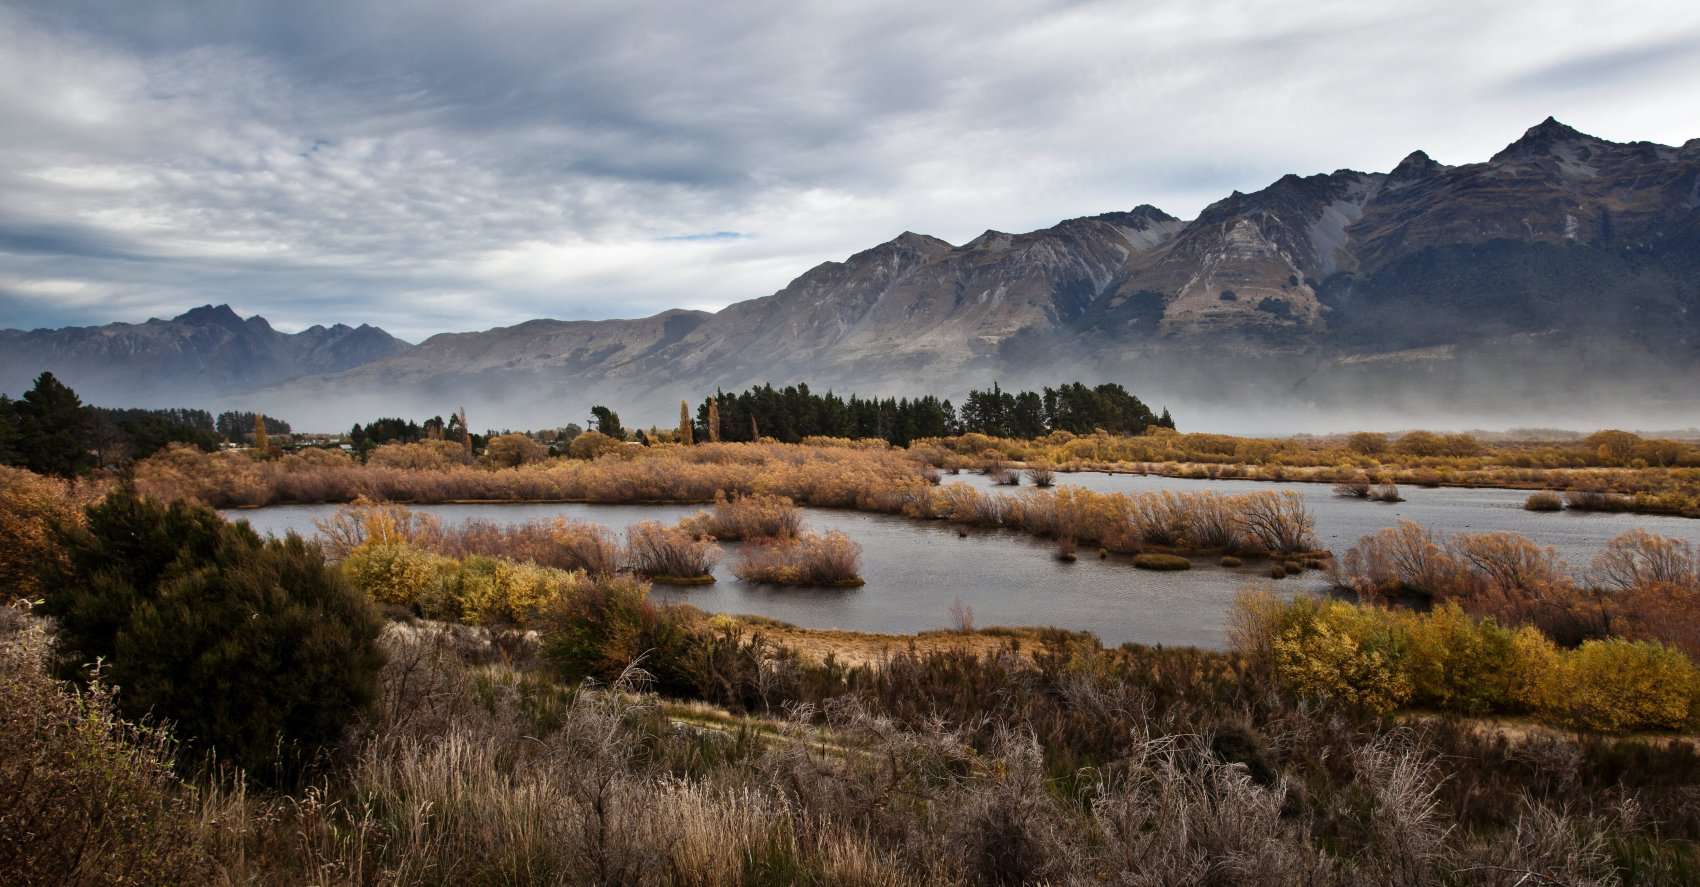 Queenstown Middle Earth Tour The 'dead marshes' Glenorchy